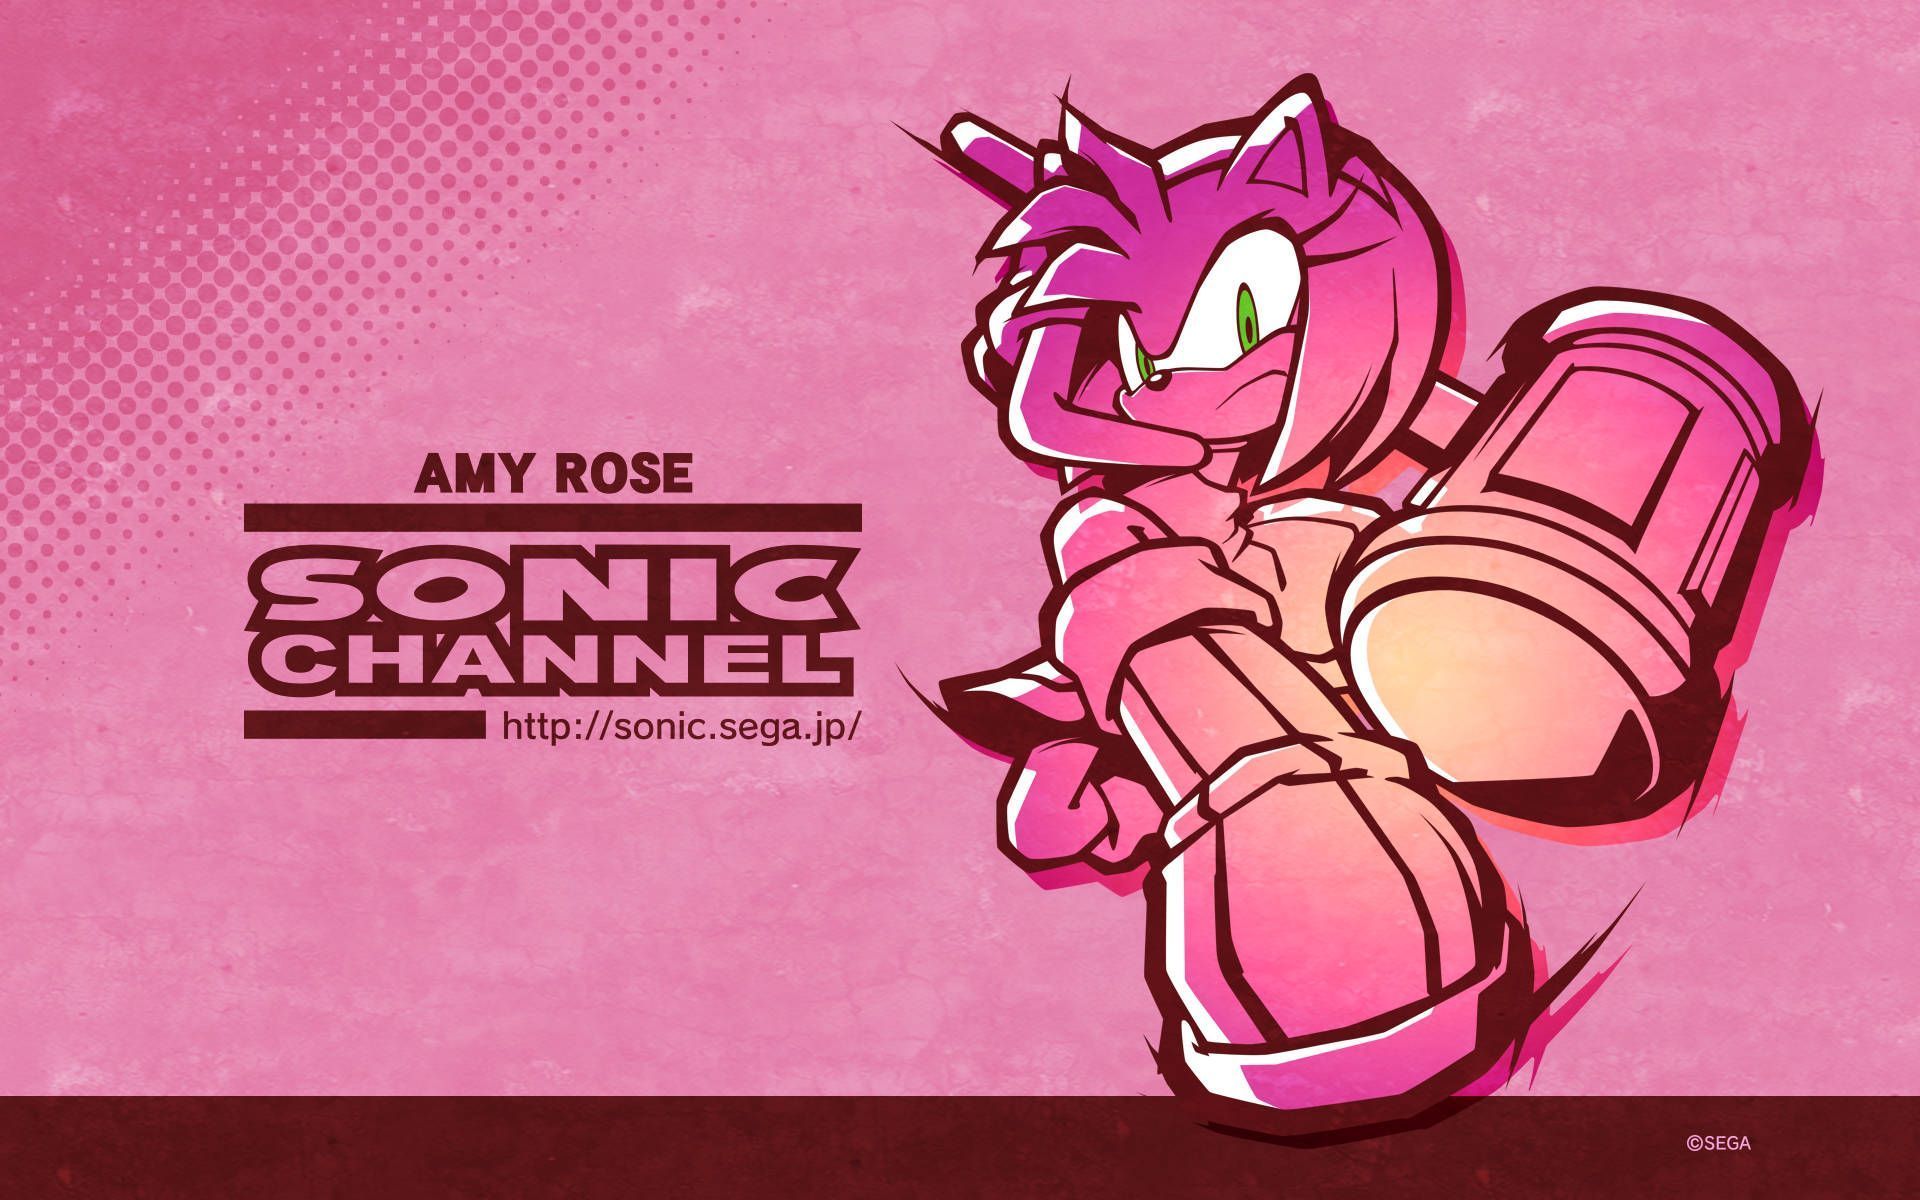 A wallpaper of Amy Rose from the Sonic Channel website - Sonic